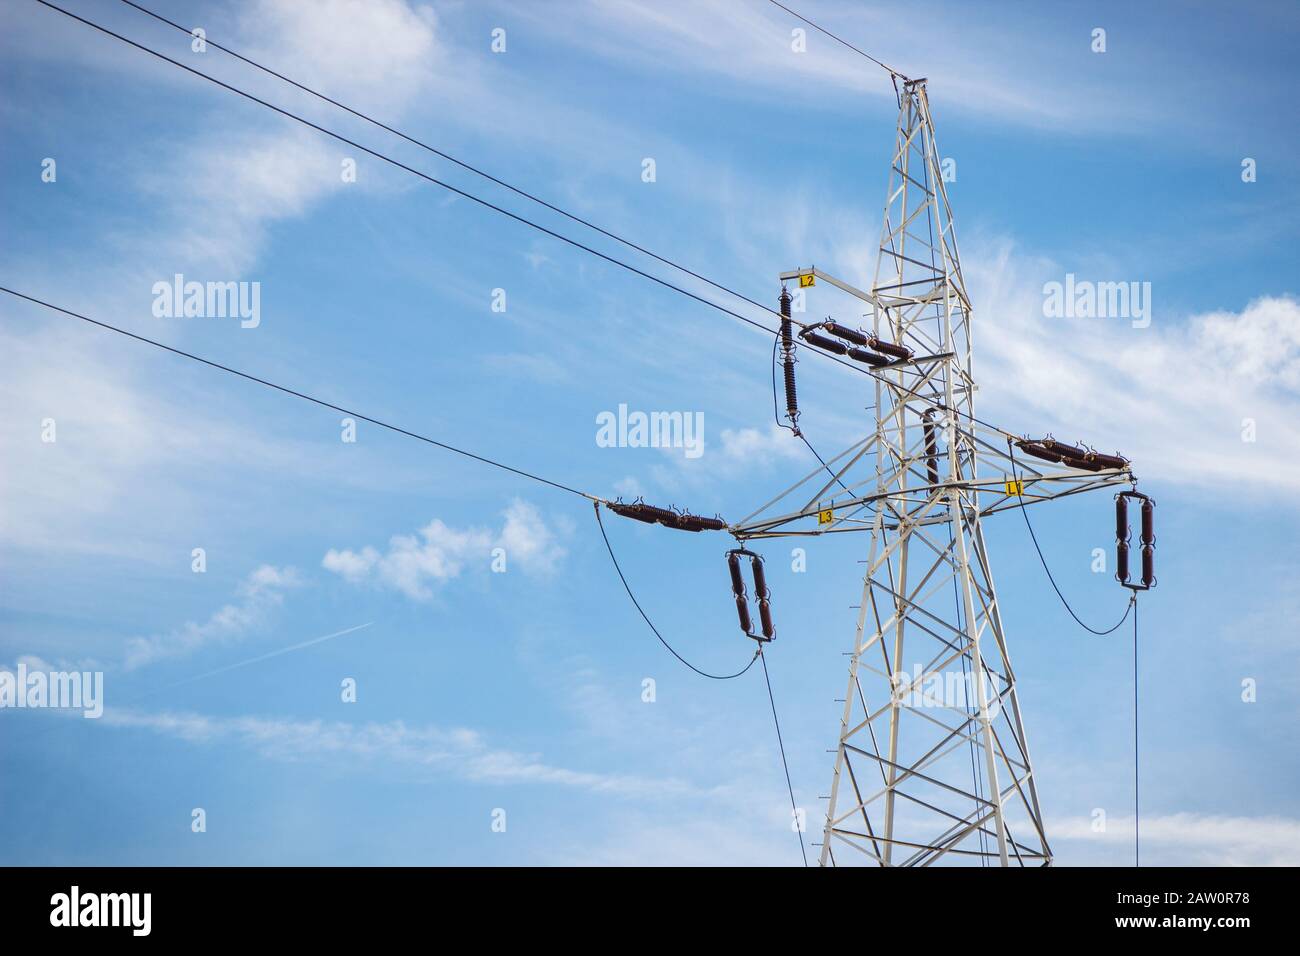 High voltage electric pole with wires on blue sky background. Line of electricity transmissions and distribution Stock Photo